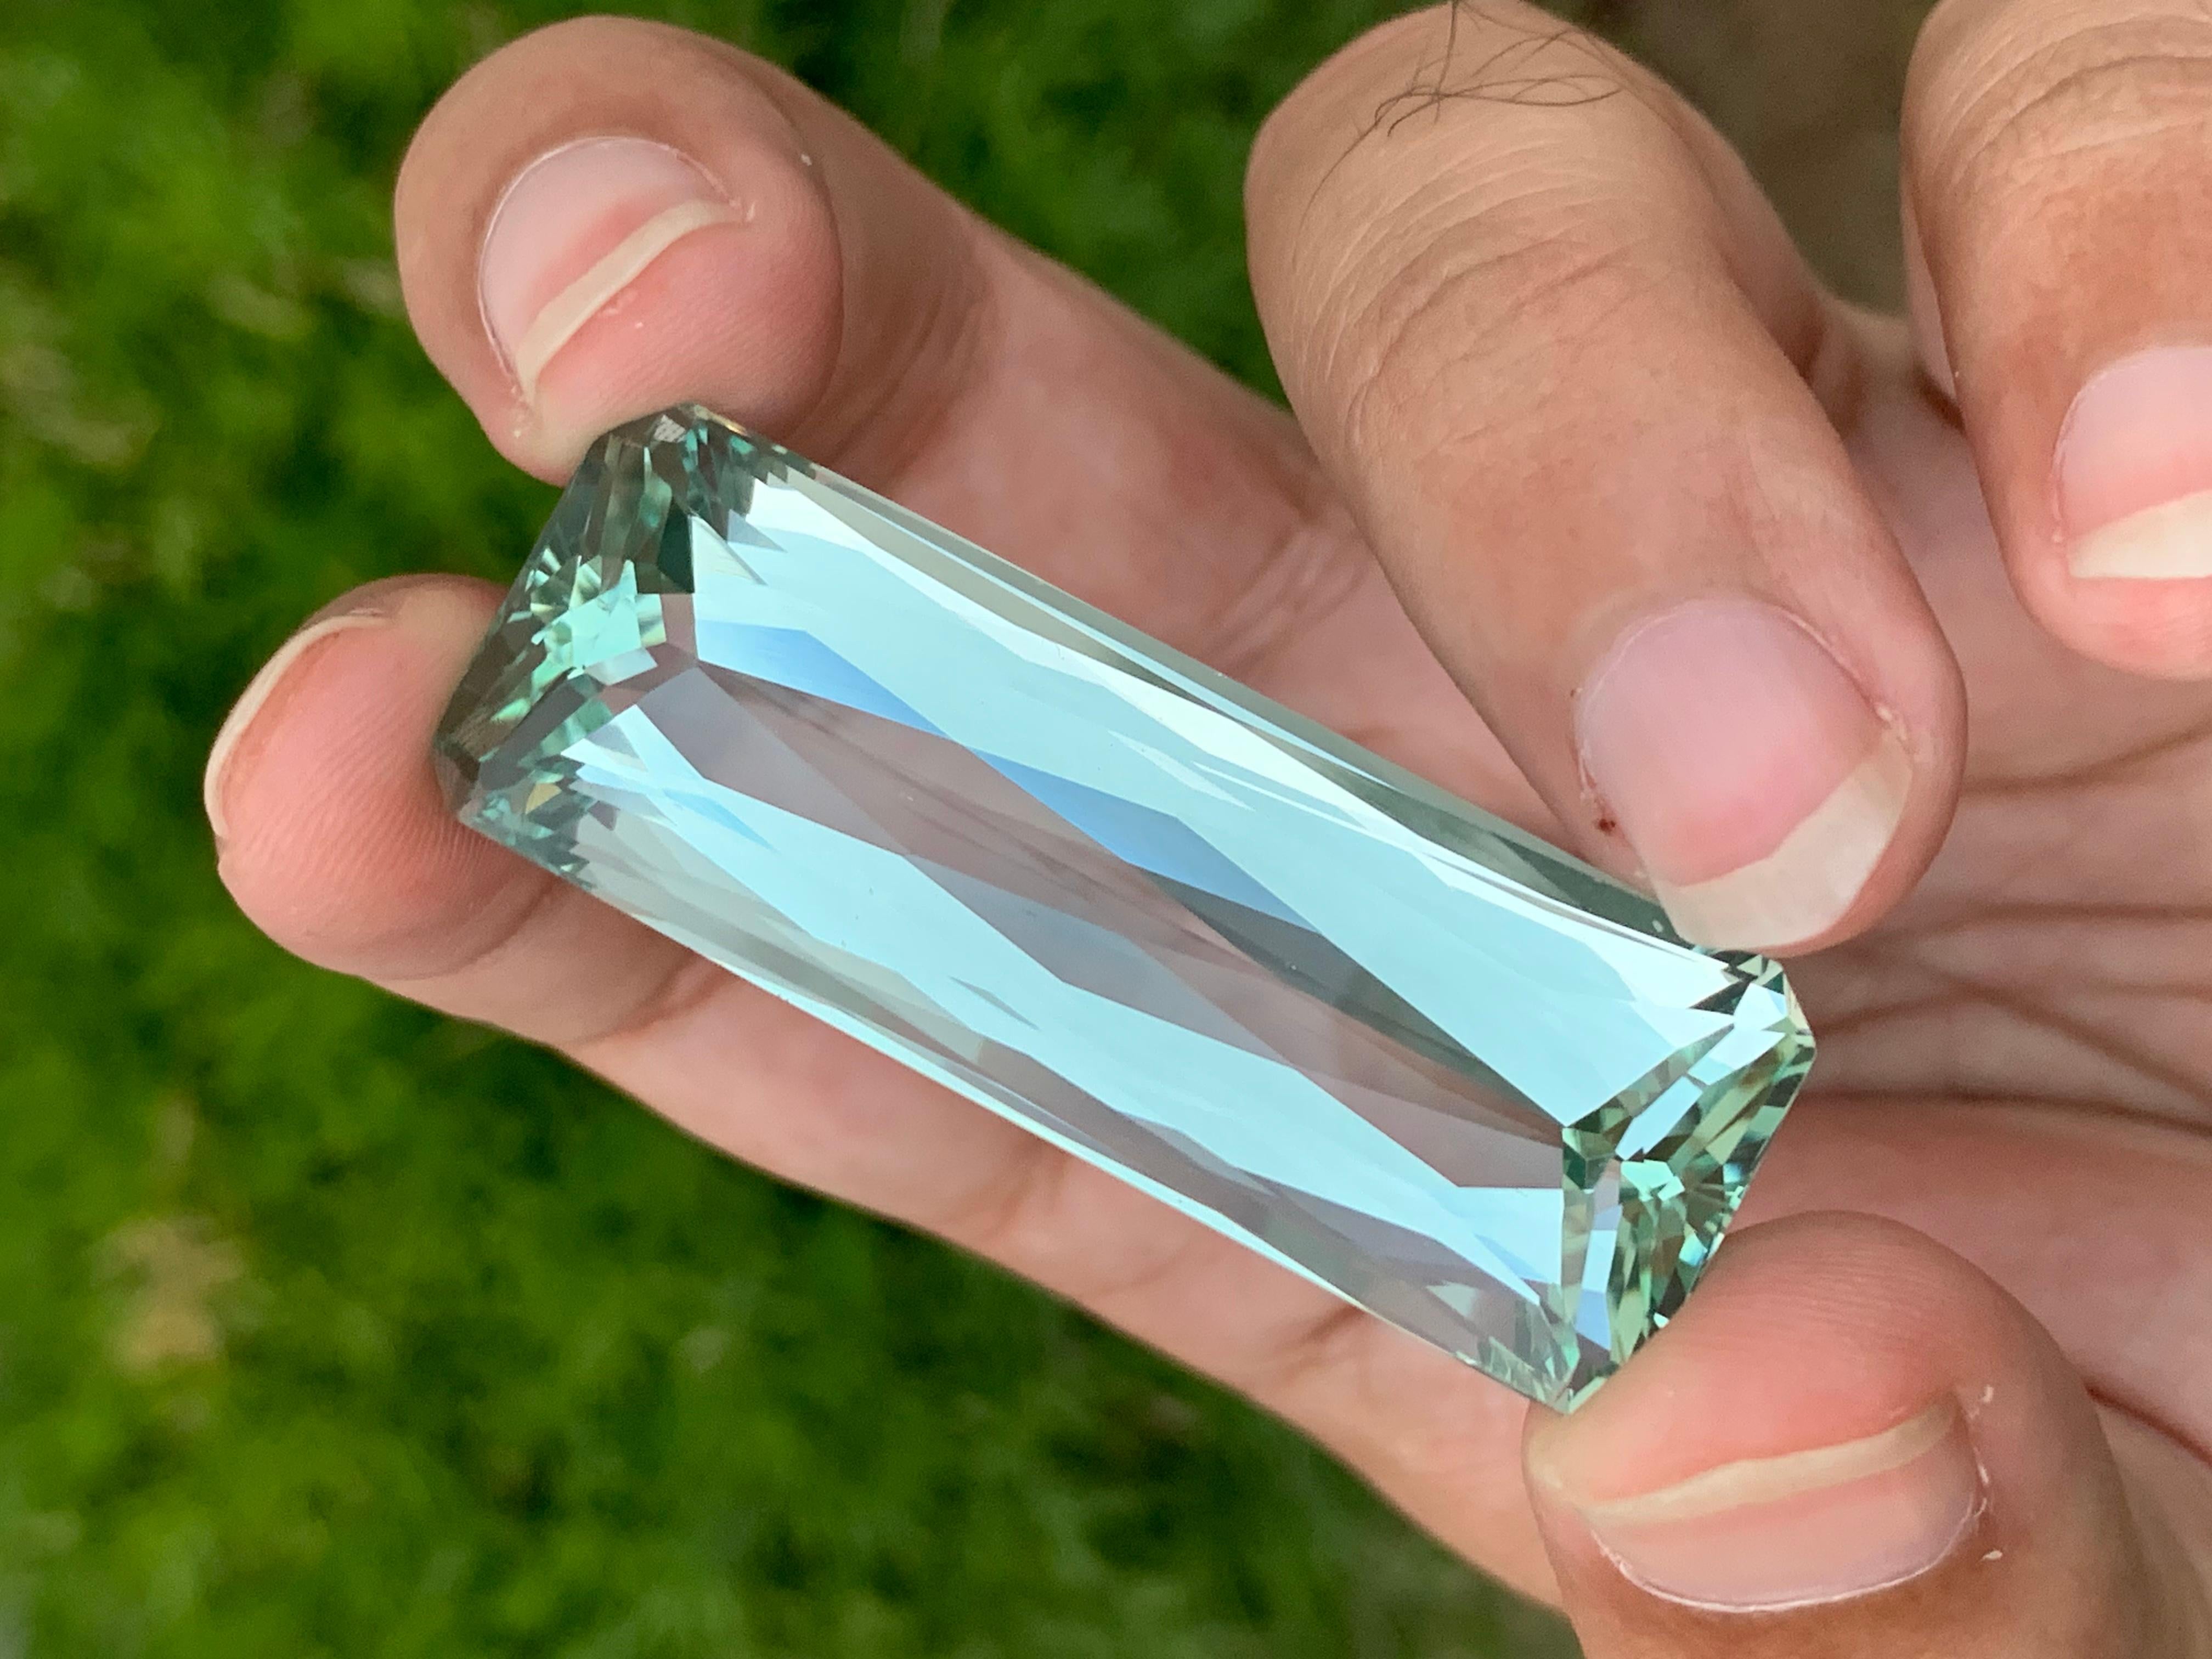 Emerald Cut 51 Mm Long Natural Loose Green Aquamarine Gem For Necklace Jewelry 108 Carats For Sale